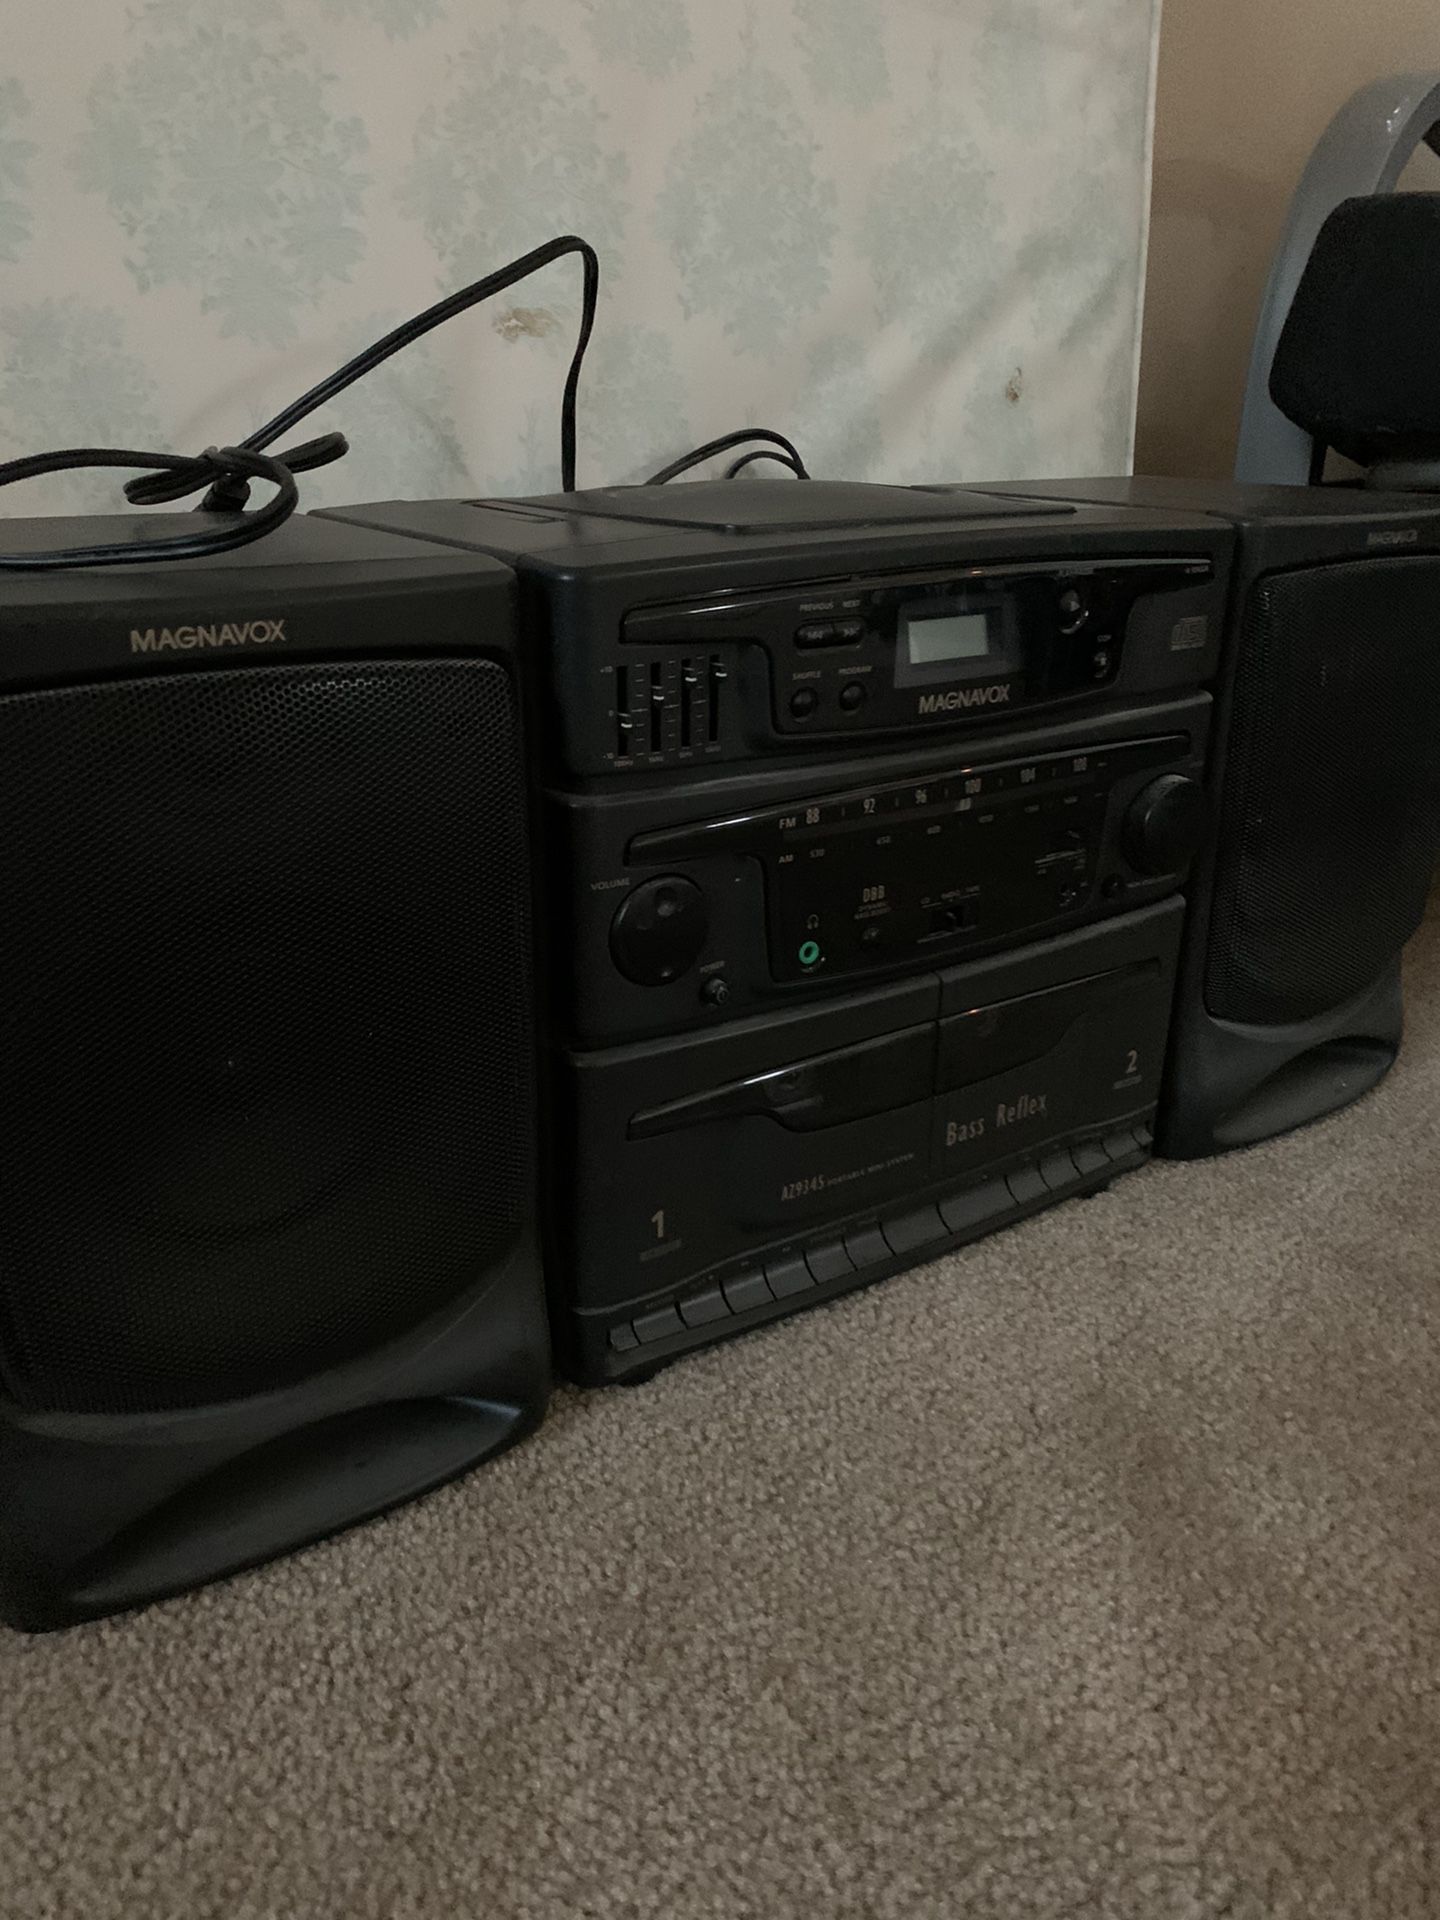 Cd/cassette player. Great condition